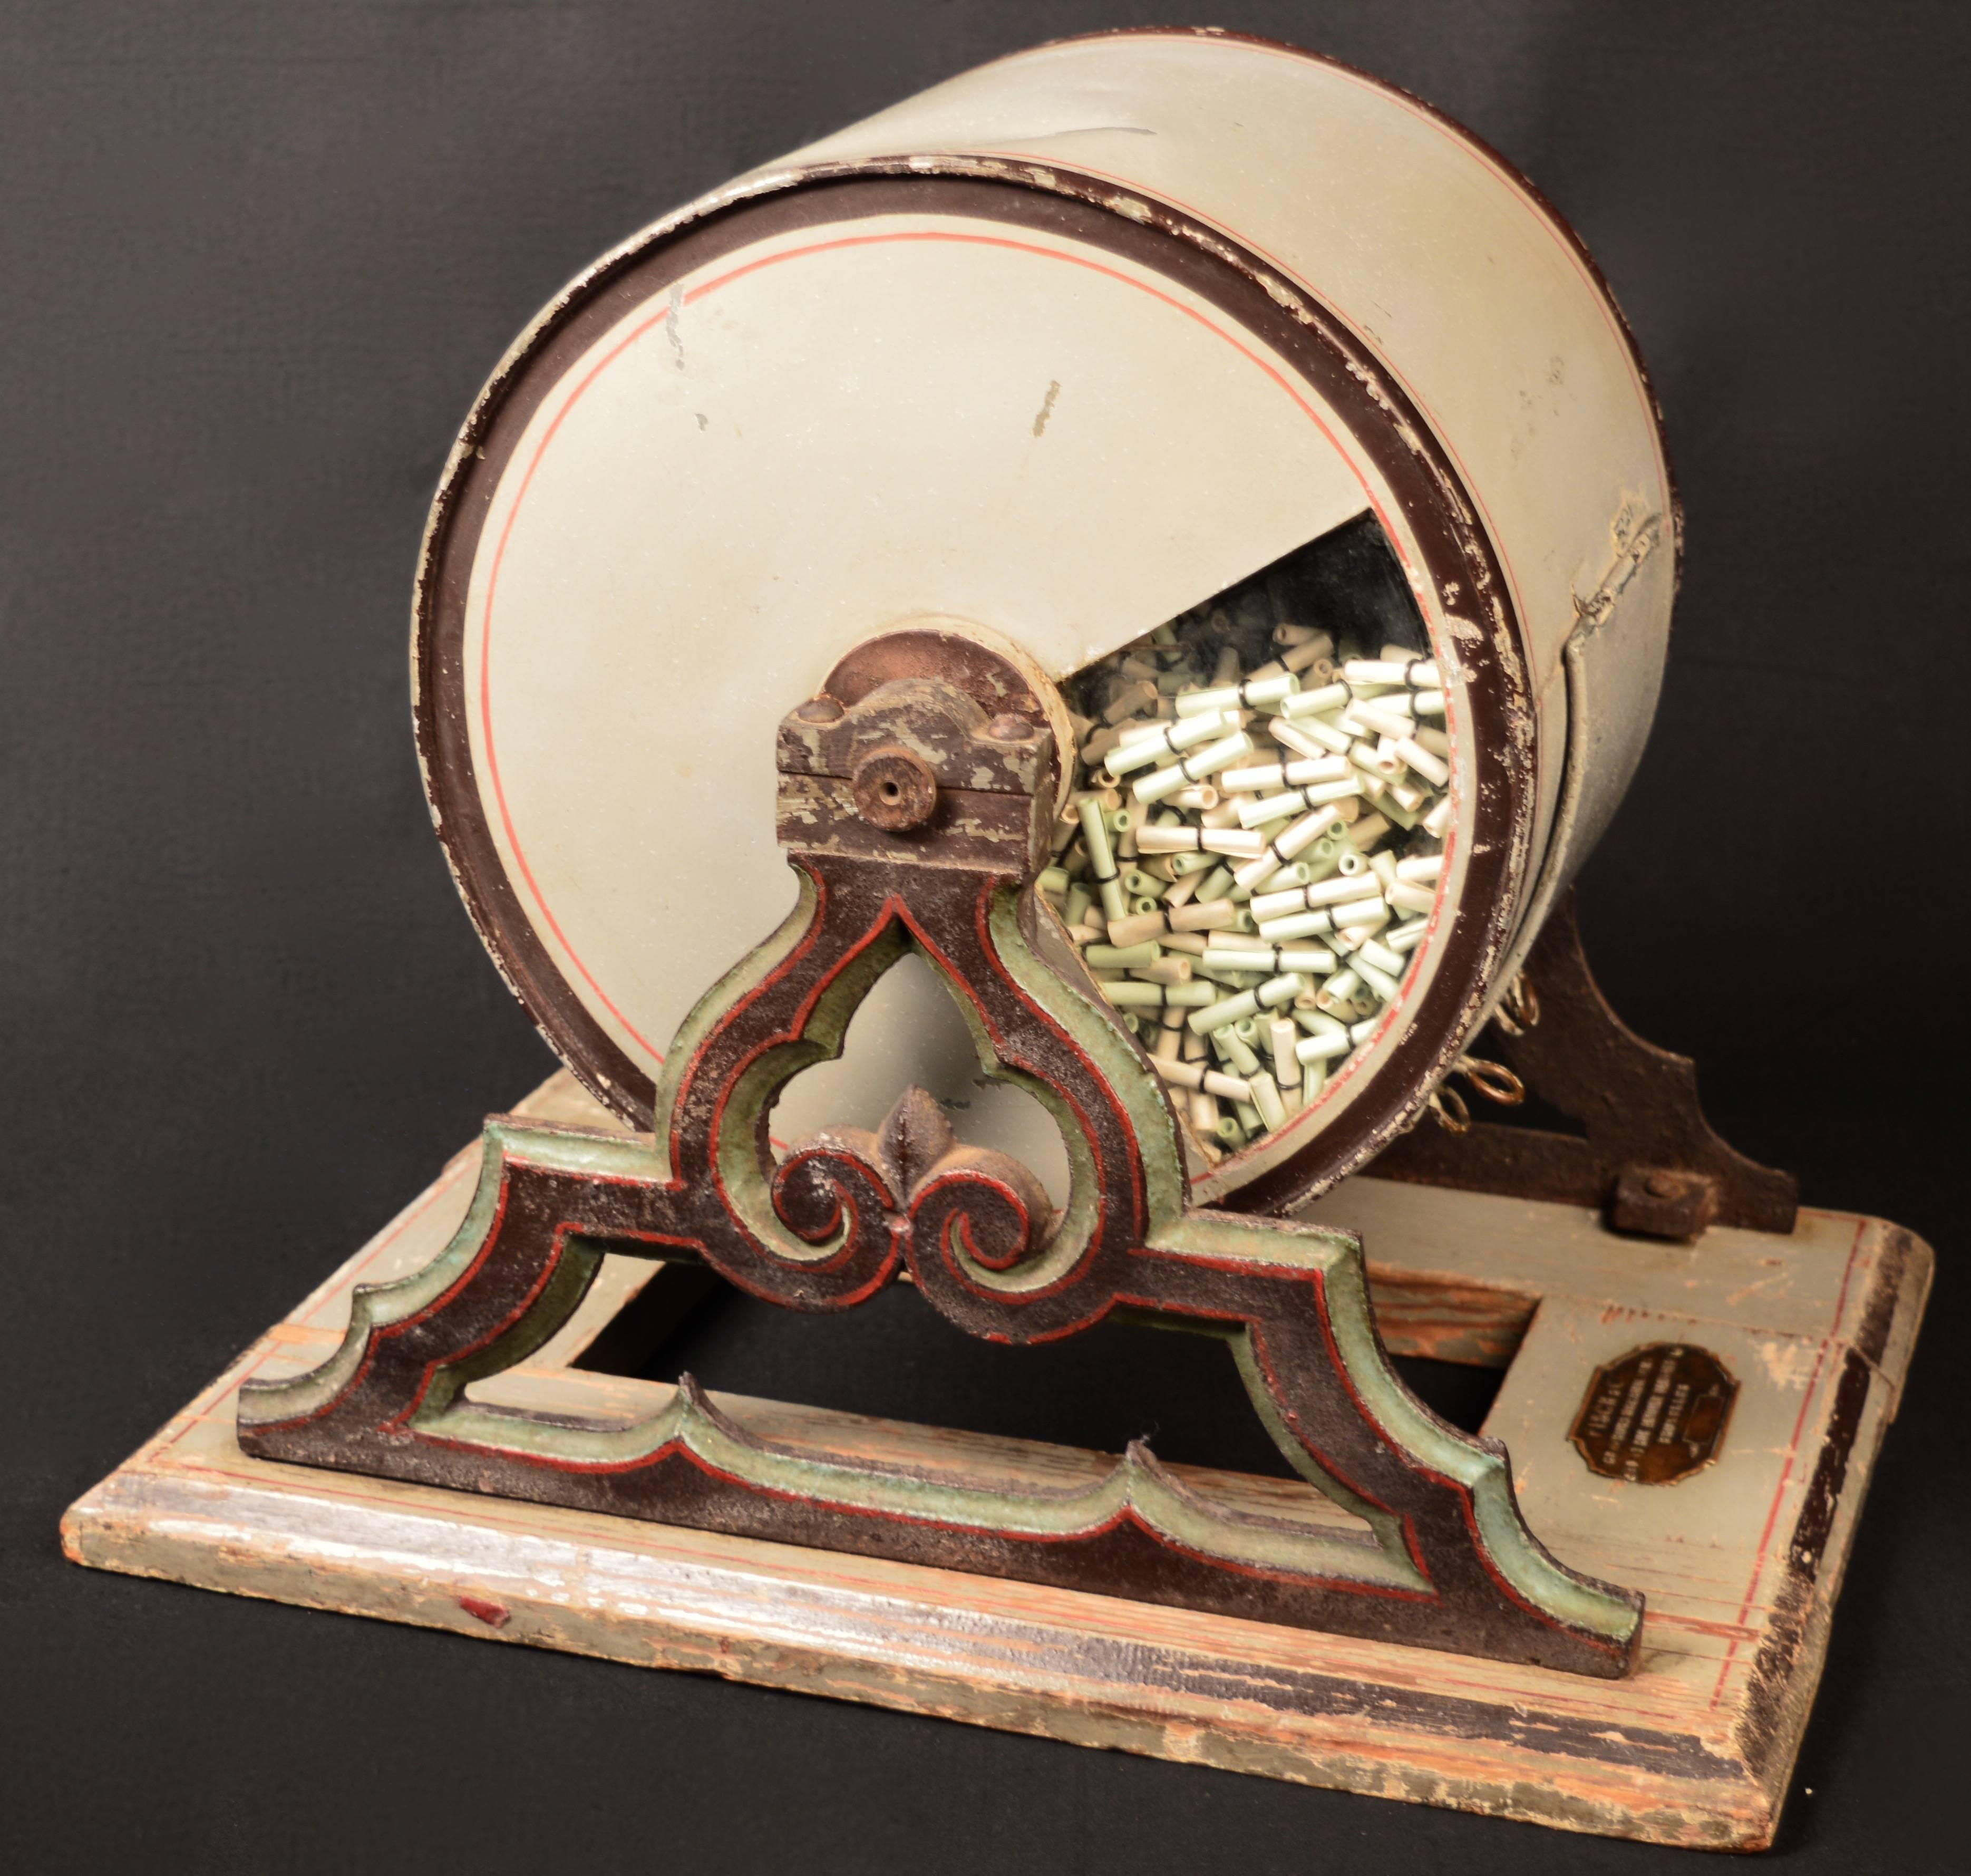 Belgian Raffle tosser filled with loan debt papers, circa 1910.
Made of tole (painted tin) on a wood base with brass plaque. Completely original. This raffle tosser or 